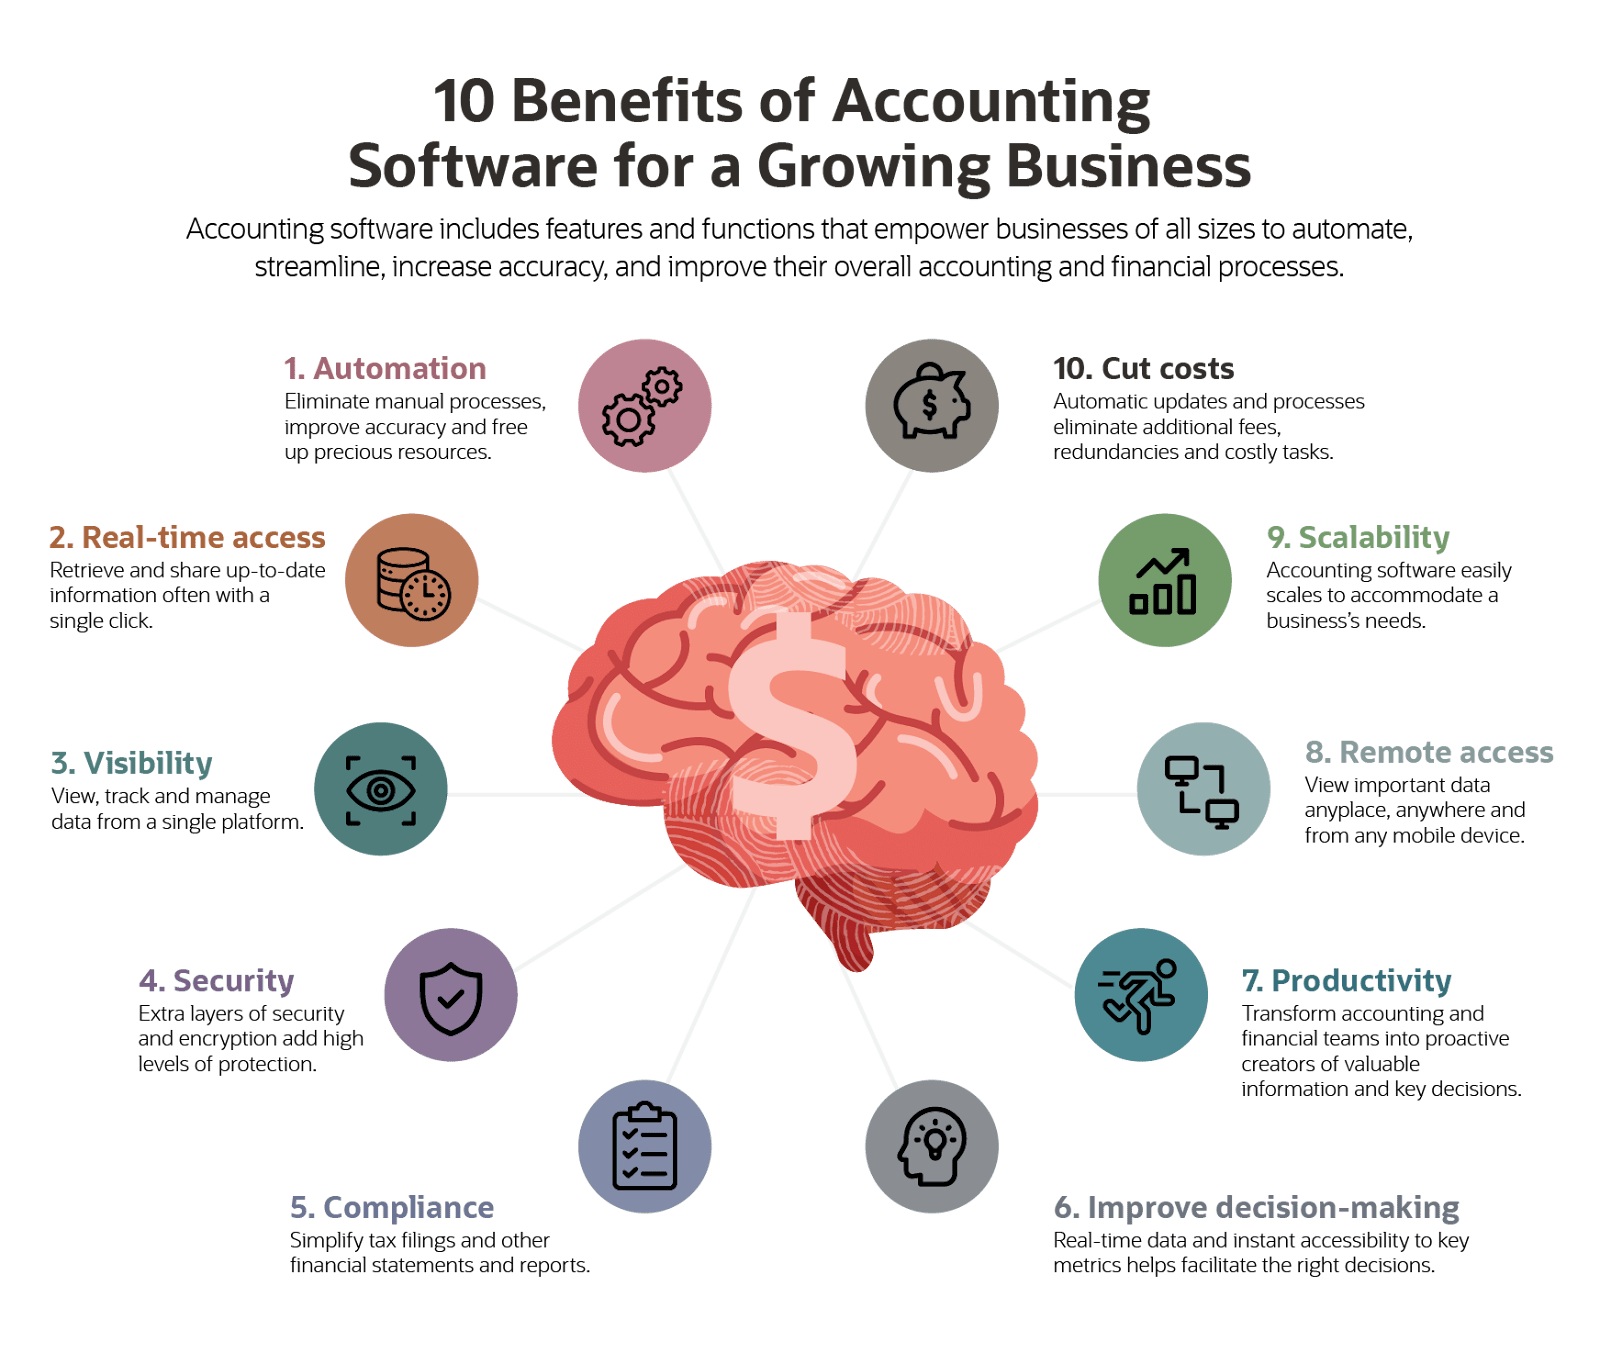 Boost Business Efficiency: Why Accounting Software is Crucial